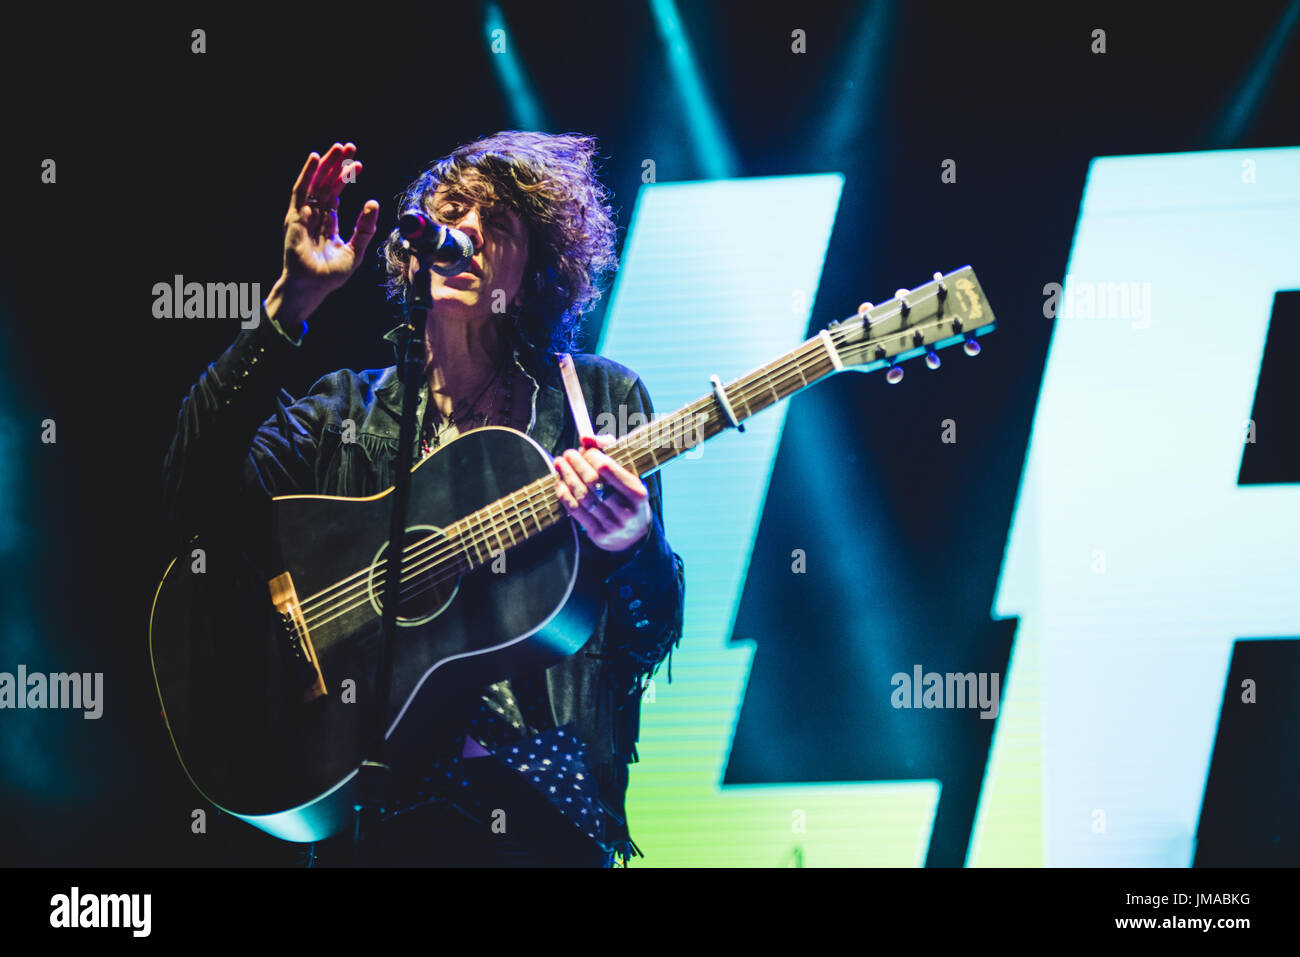 Grugliasco, Italy. 25th July, 2017. The American singer and songwriter LP performing live on stage at the Gruvillage Festival 2017 in Grugliasco, near Torino. Credit: Alessandro Bosio/Pacific Press/Alamy Live News Stock Photo